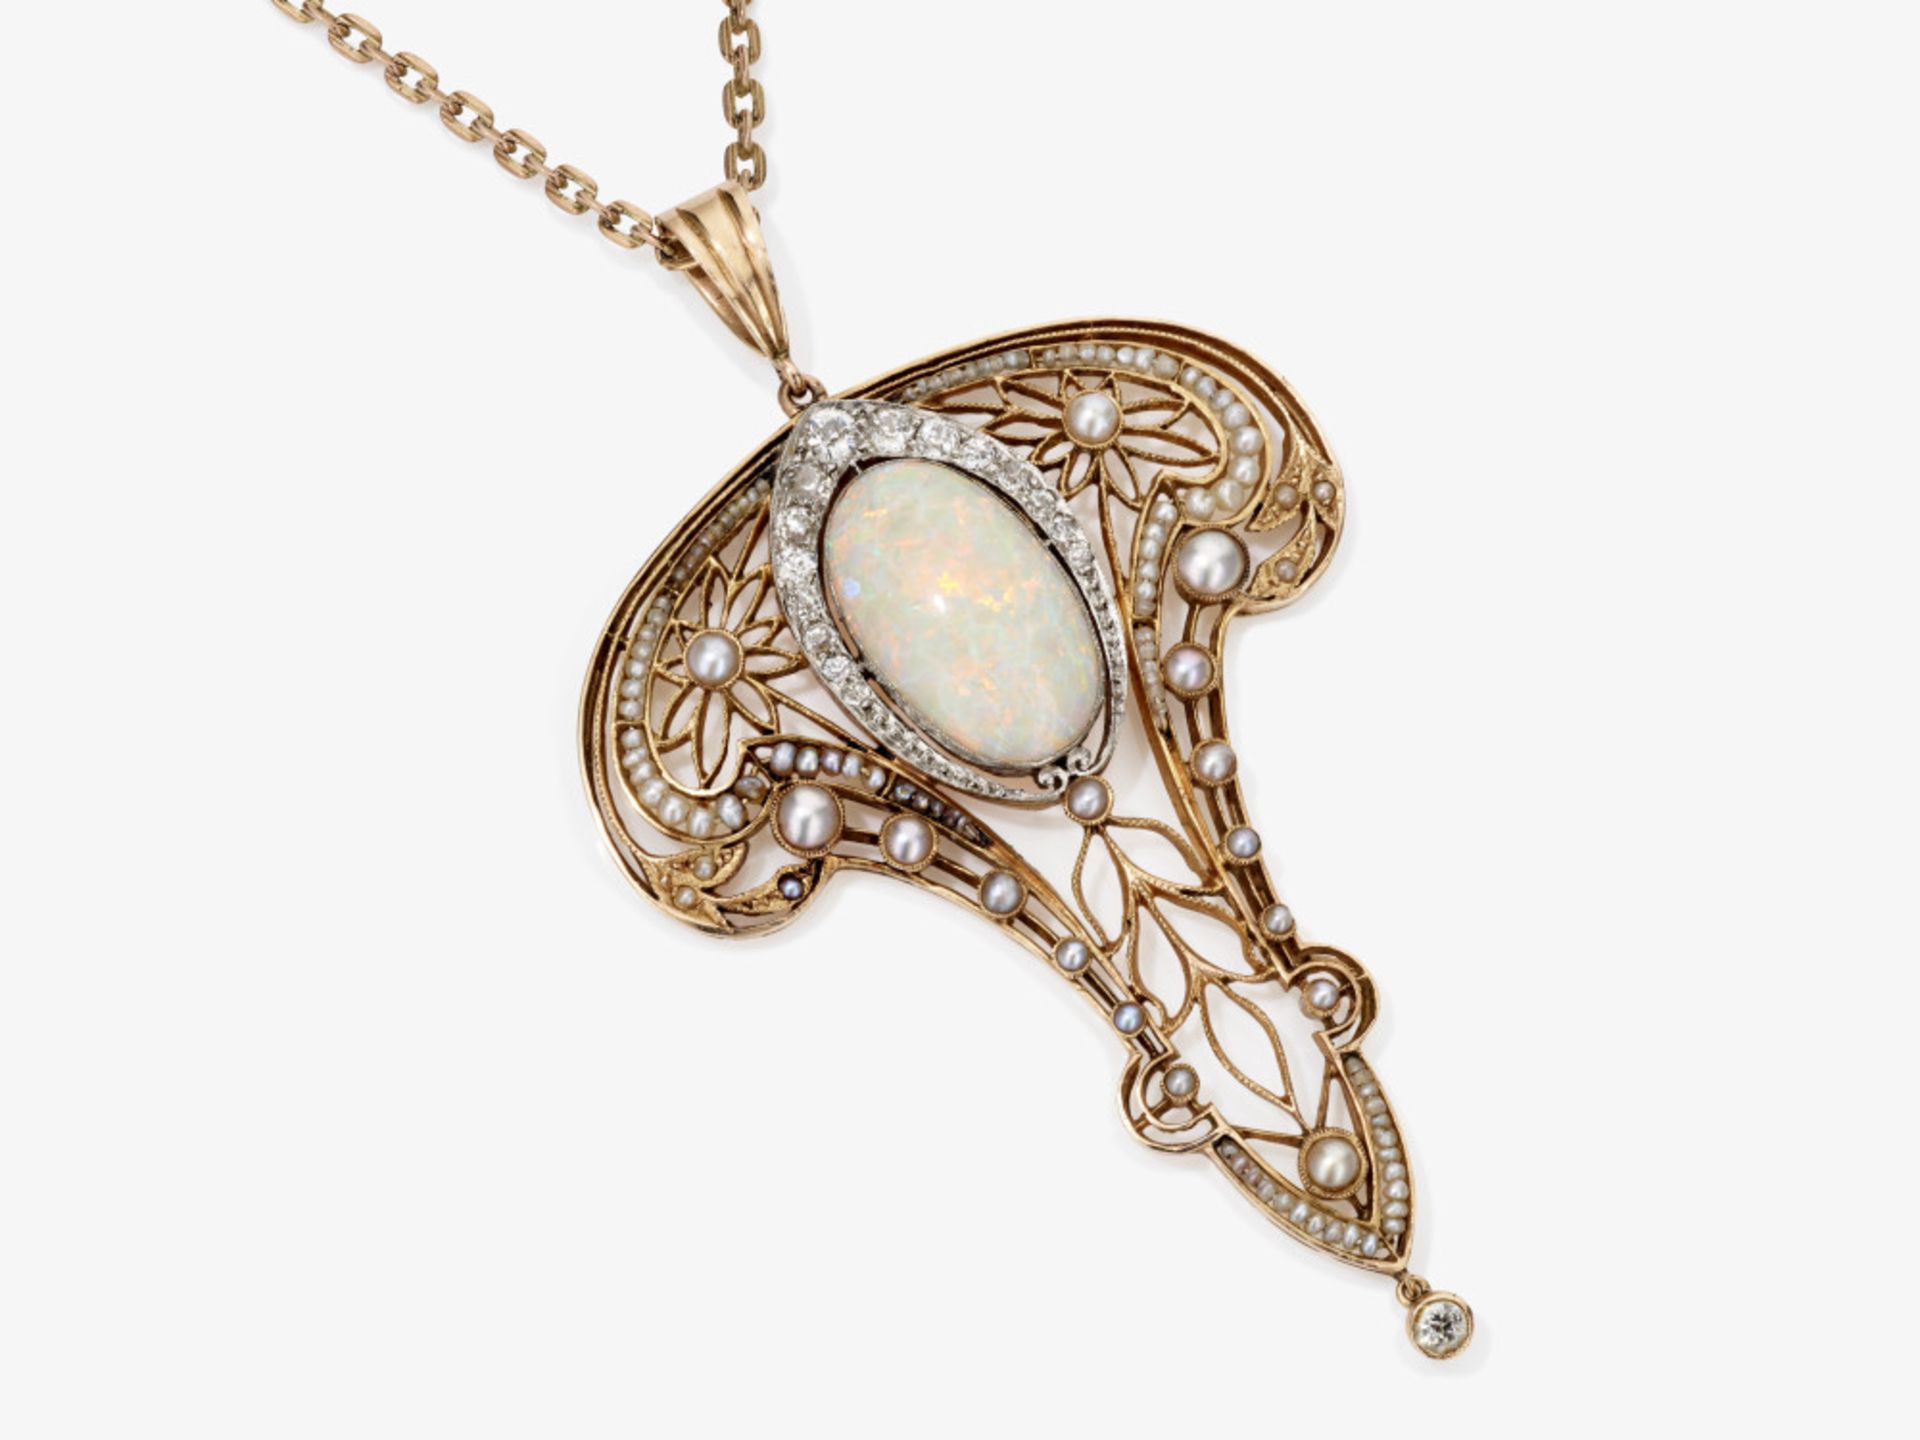 An exquisite pendant with a crystal opal and diamonds - Germany, circa 1900